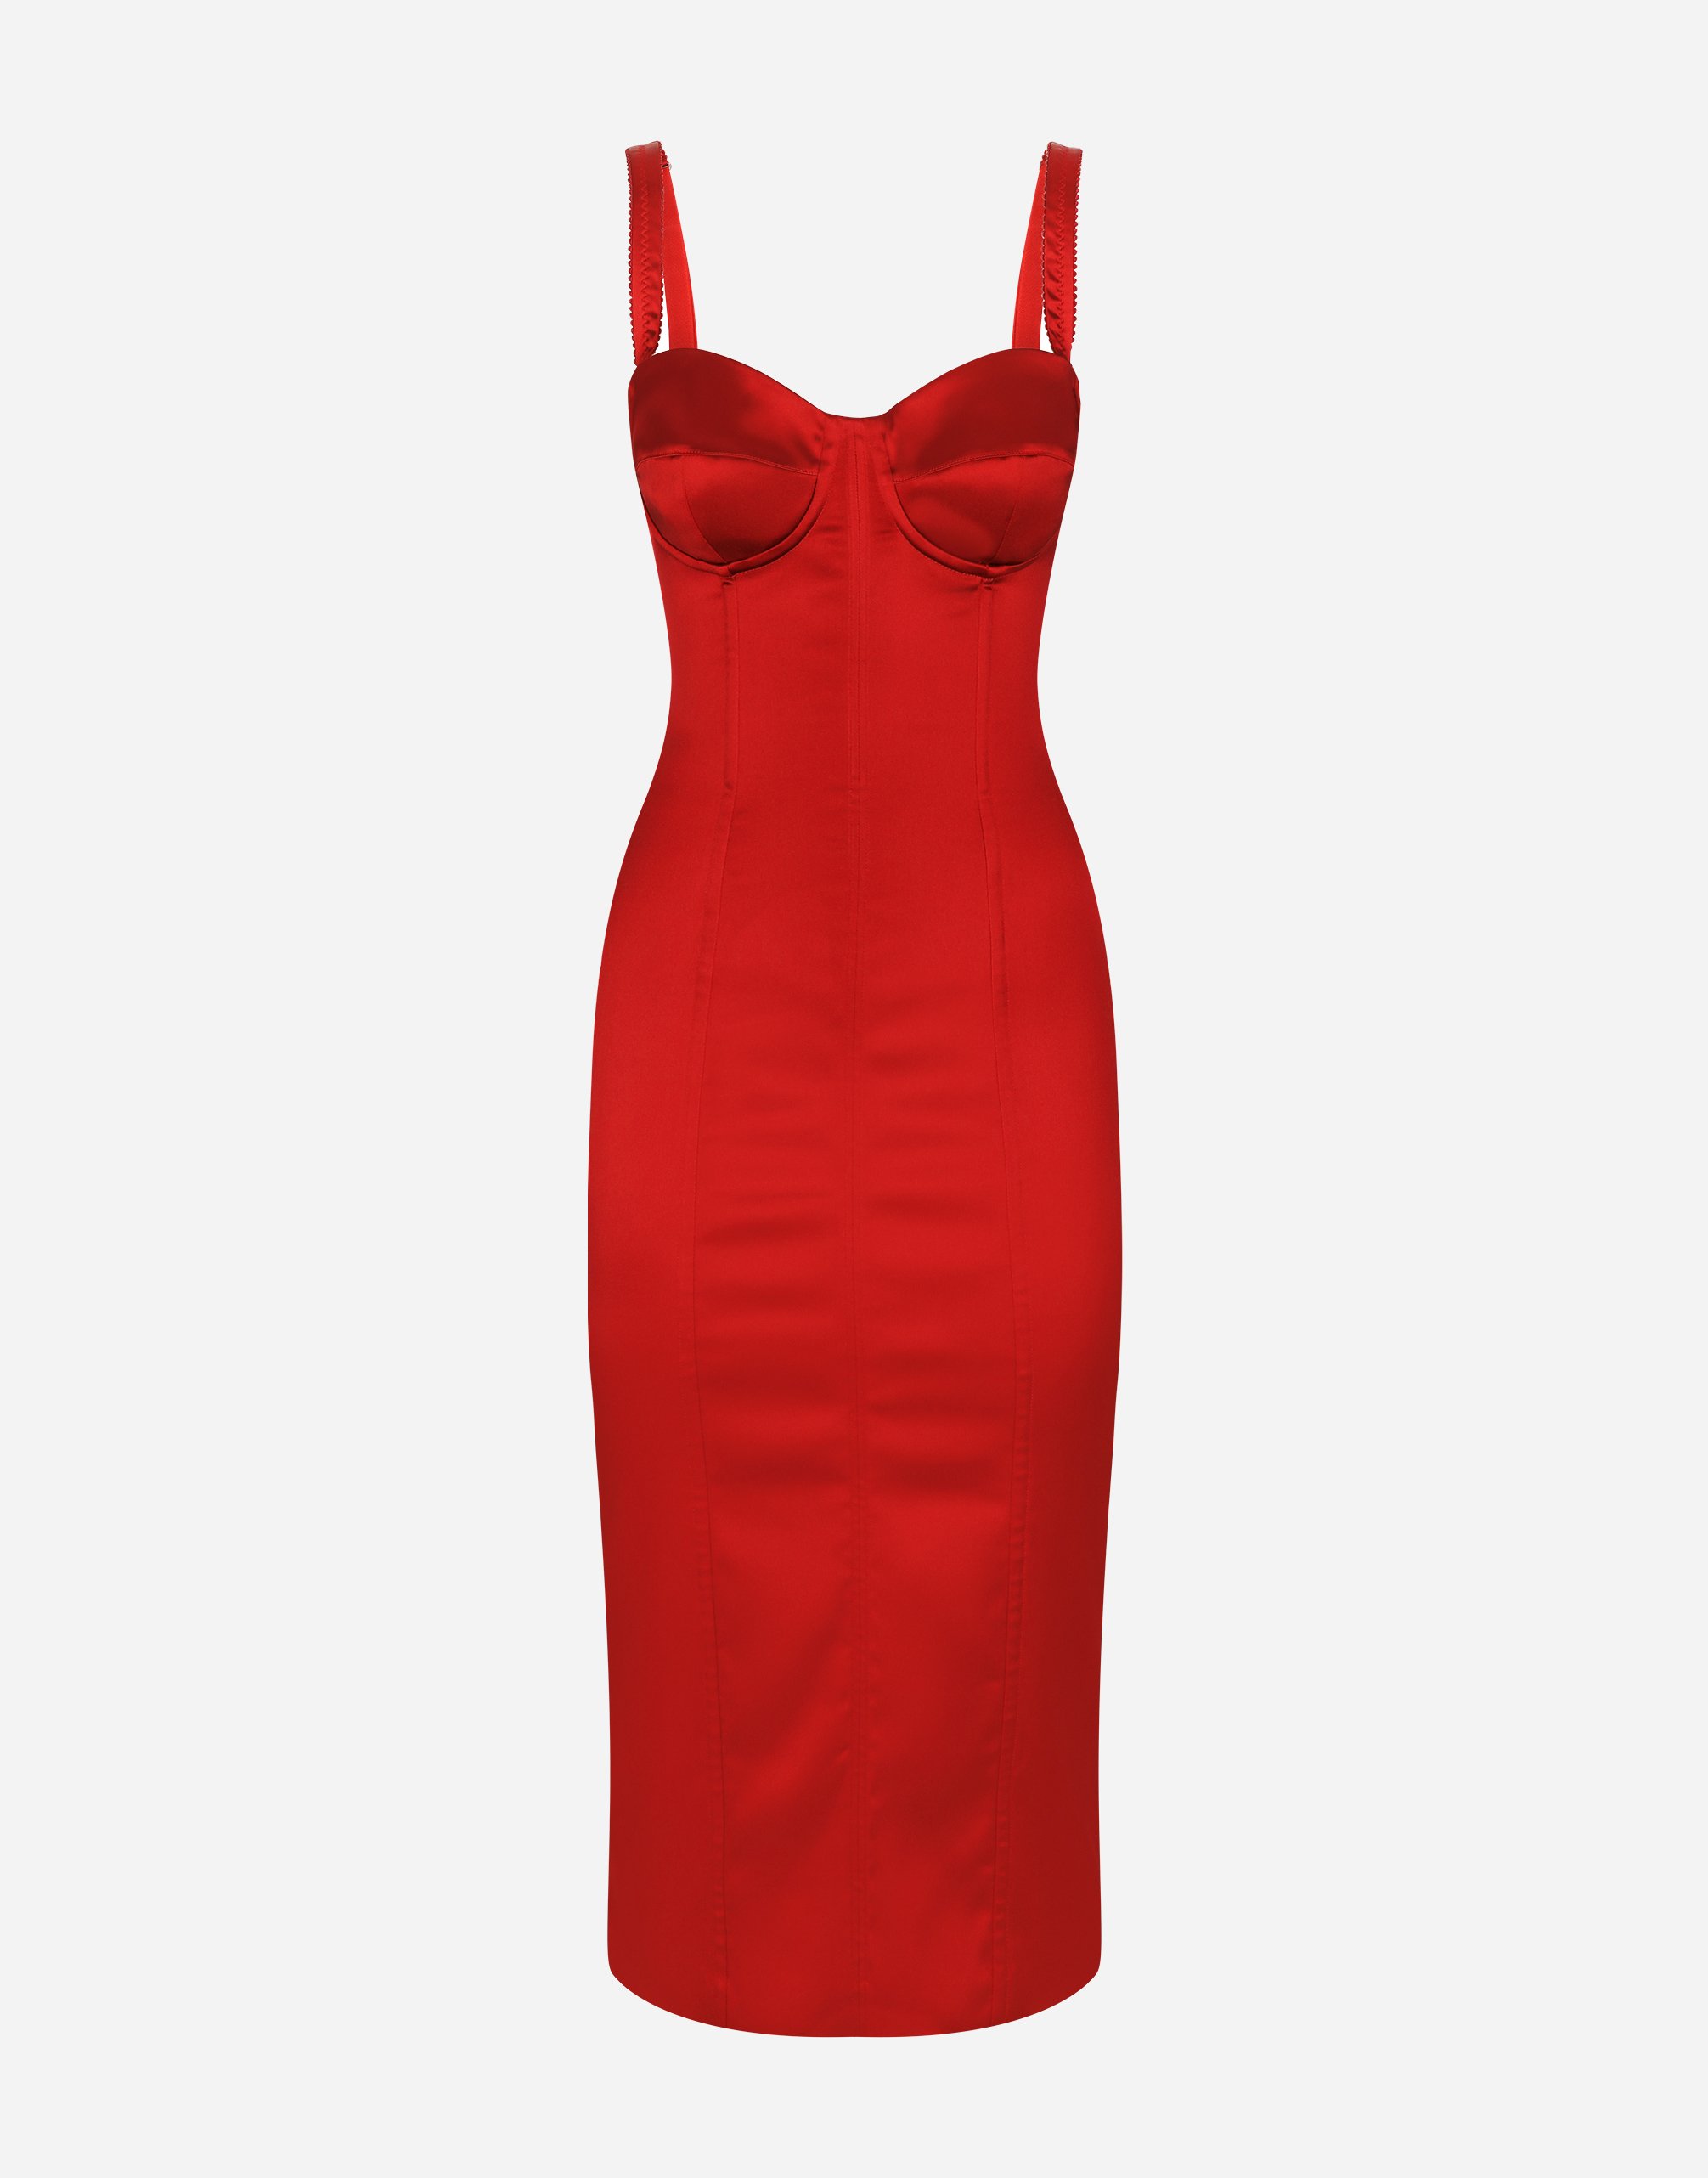 Dolce & Gabbana Satin Calf-length Dress With Corset Bustier In Red